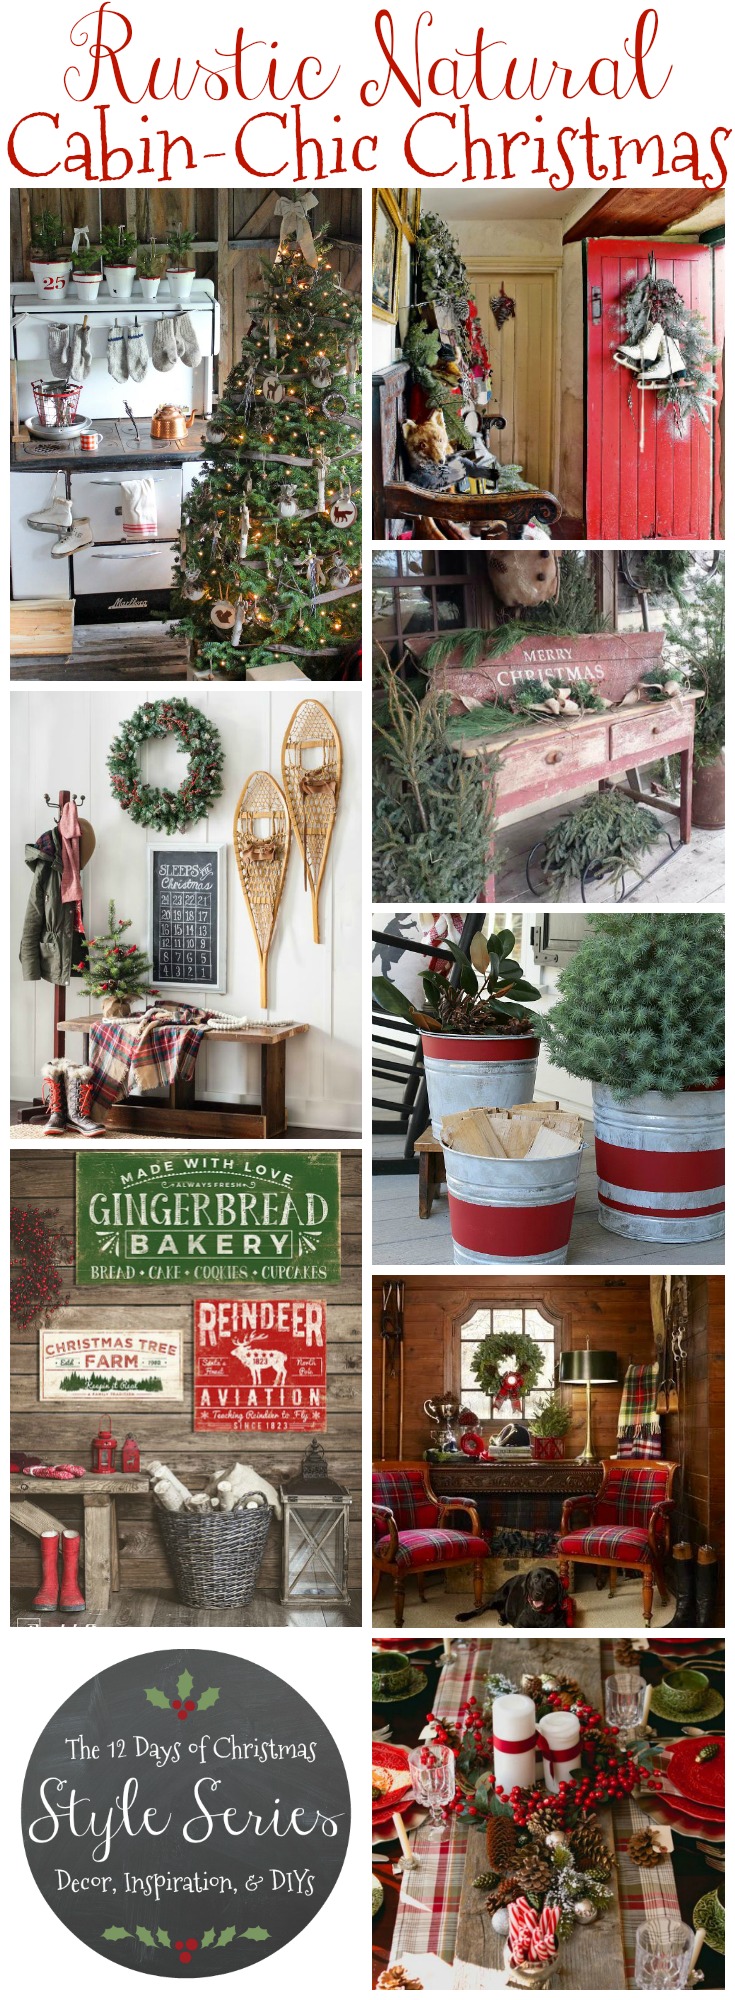 rustic-natural-cabin-chic-christmas-decor-inspiration-diys-and-ideas